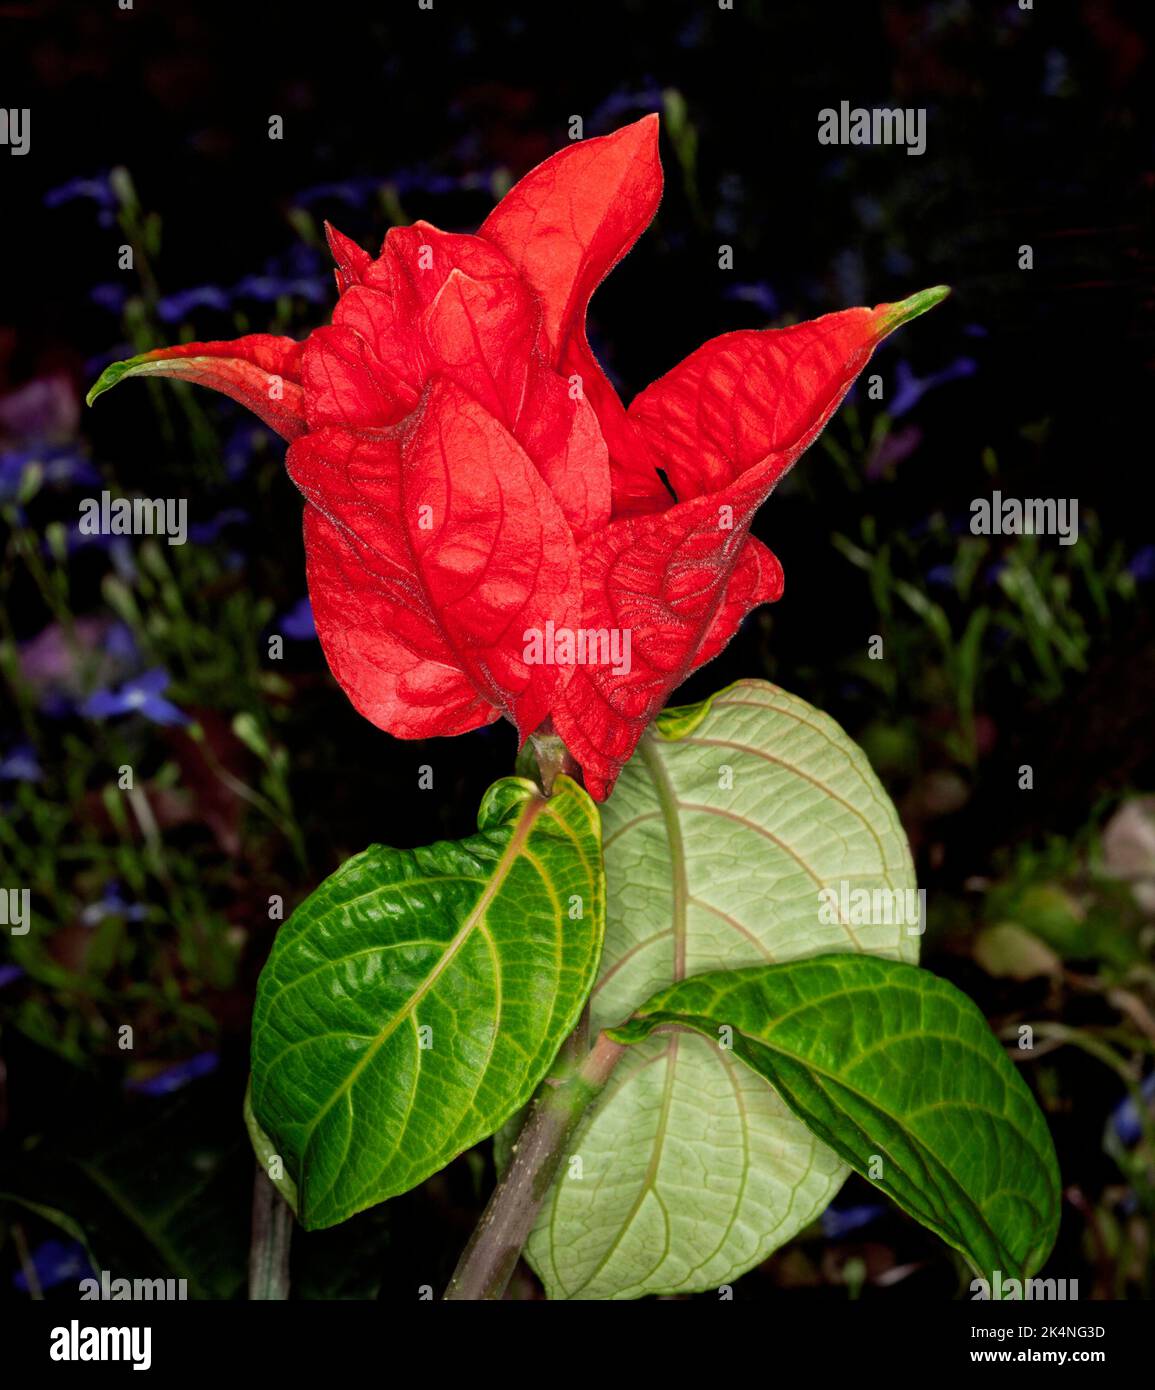 Stunning vivid red flowers and bracts and green leaves of rare plant, Ruellia chartaceae,Red Shrimp Plant, on dark green background Stock Photo